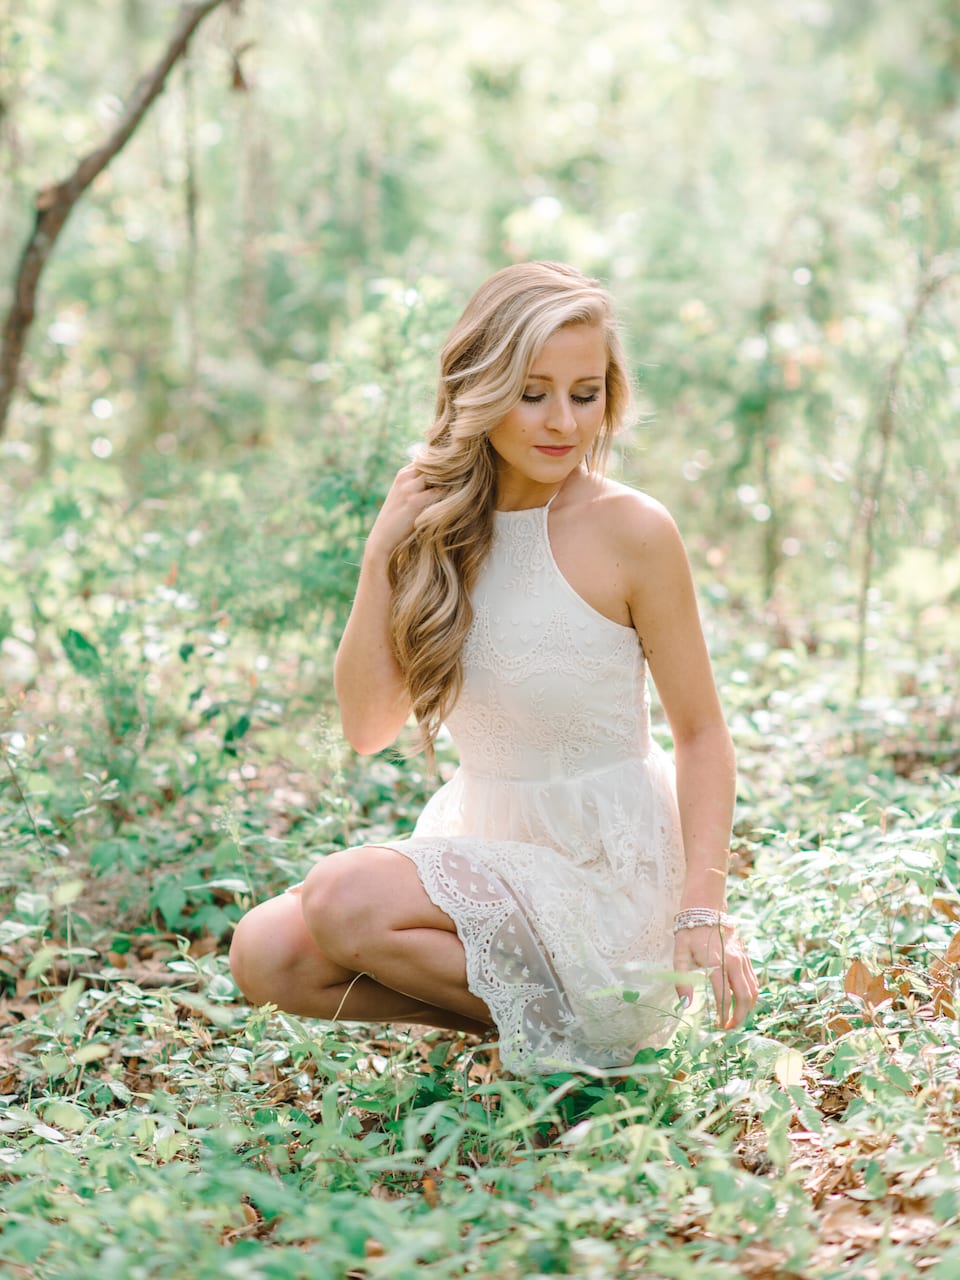 White Lace Short Dress Ideas for High School Senior Photography Session in Myrtle Beach and Charleston, SC